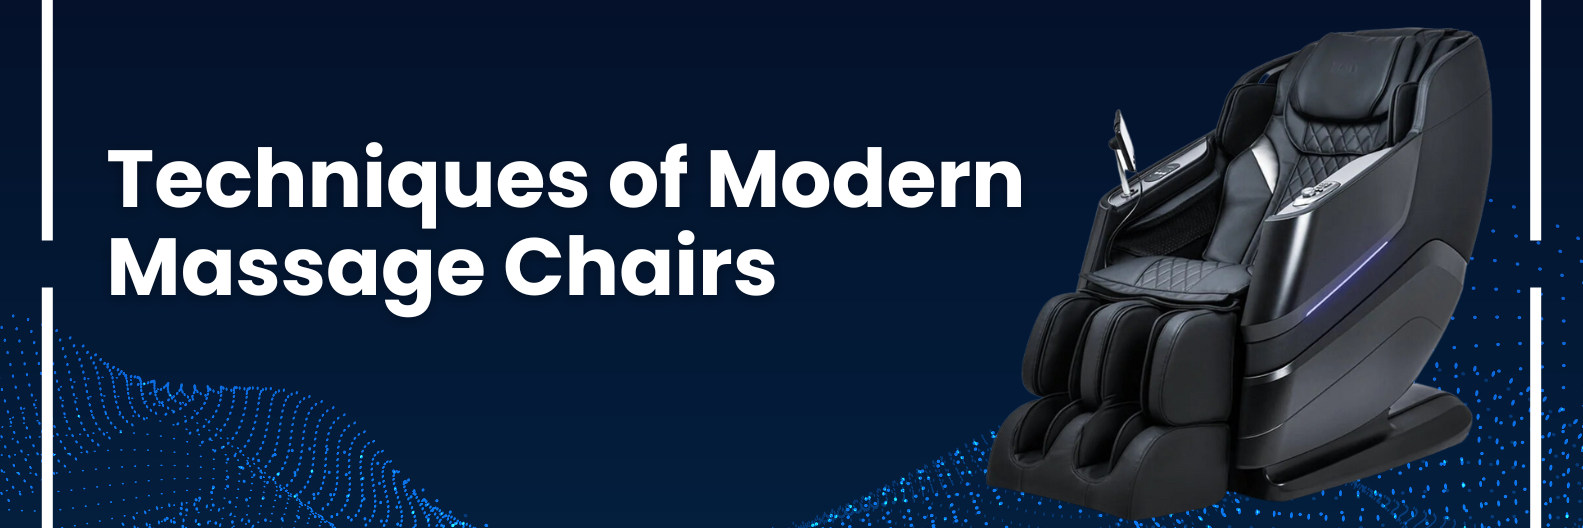 Modern massage chairs offer advanced techniques for relieving aching muscles, increasing flexibility, and minimizing injury risk. 